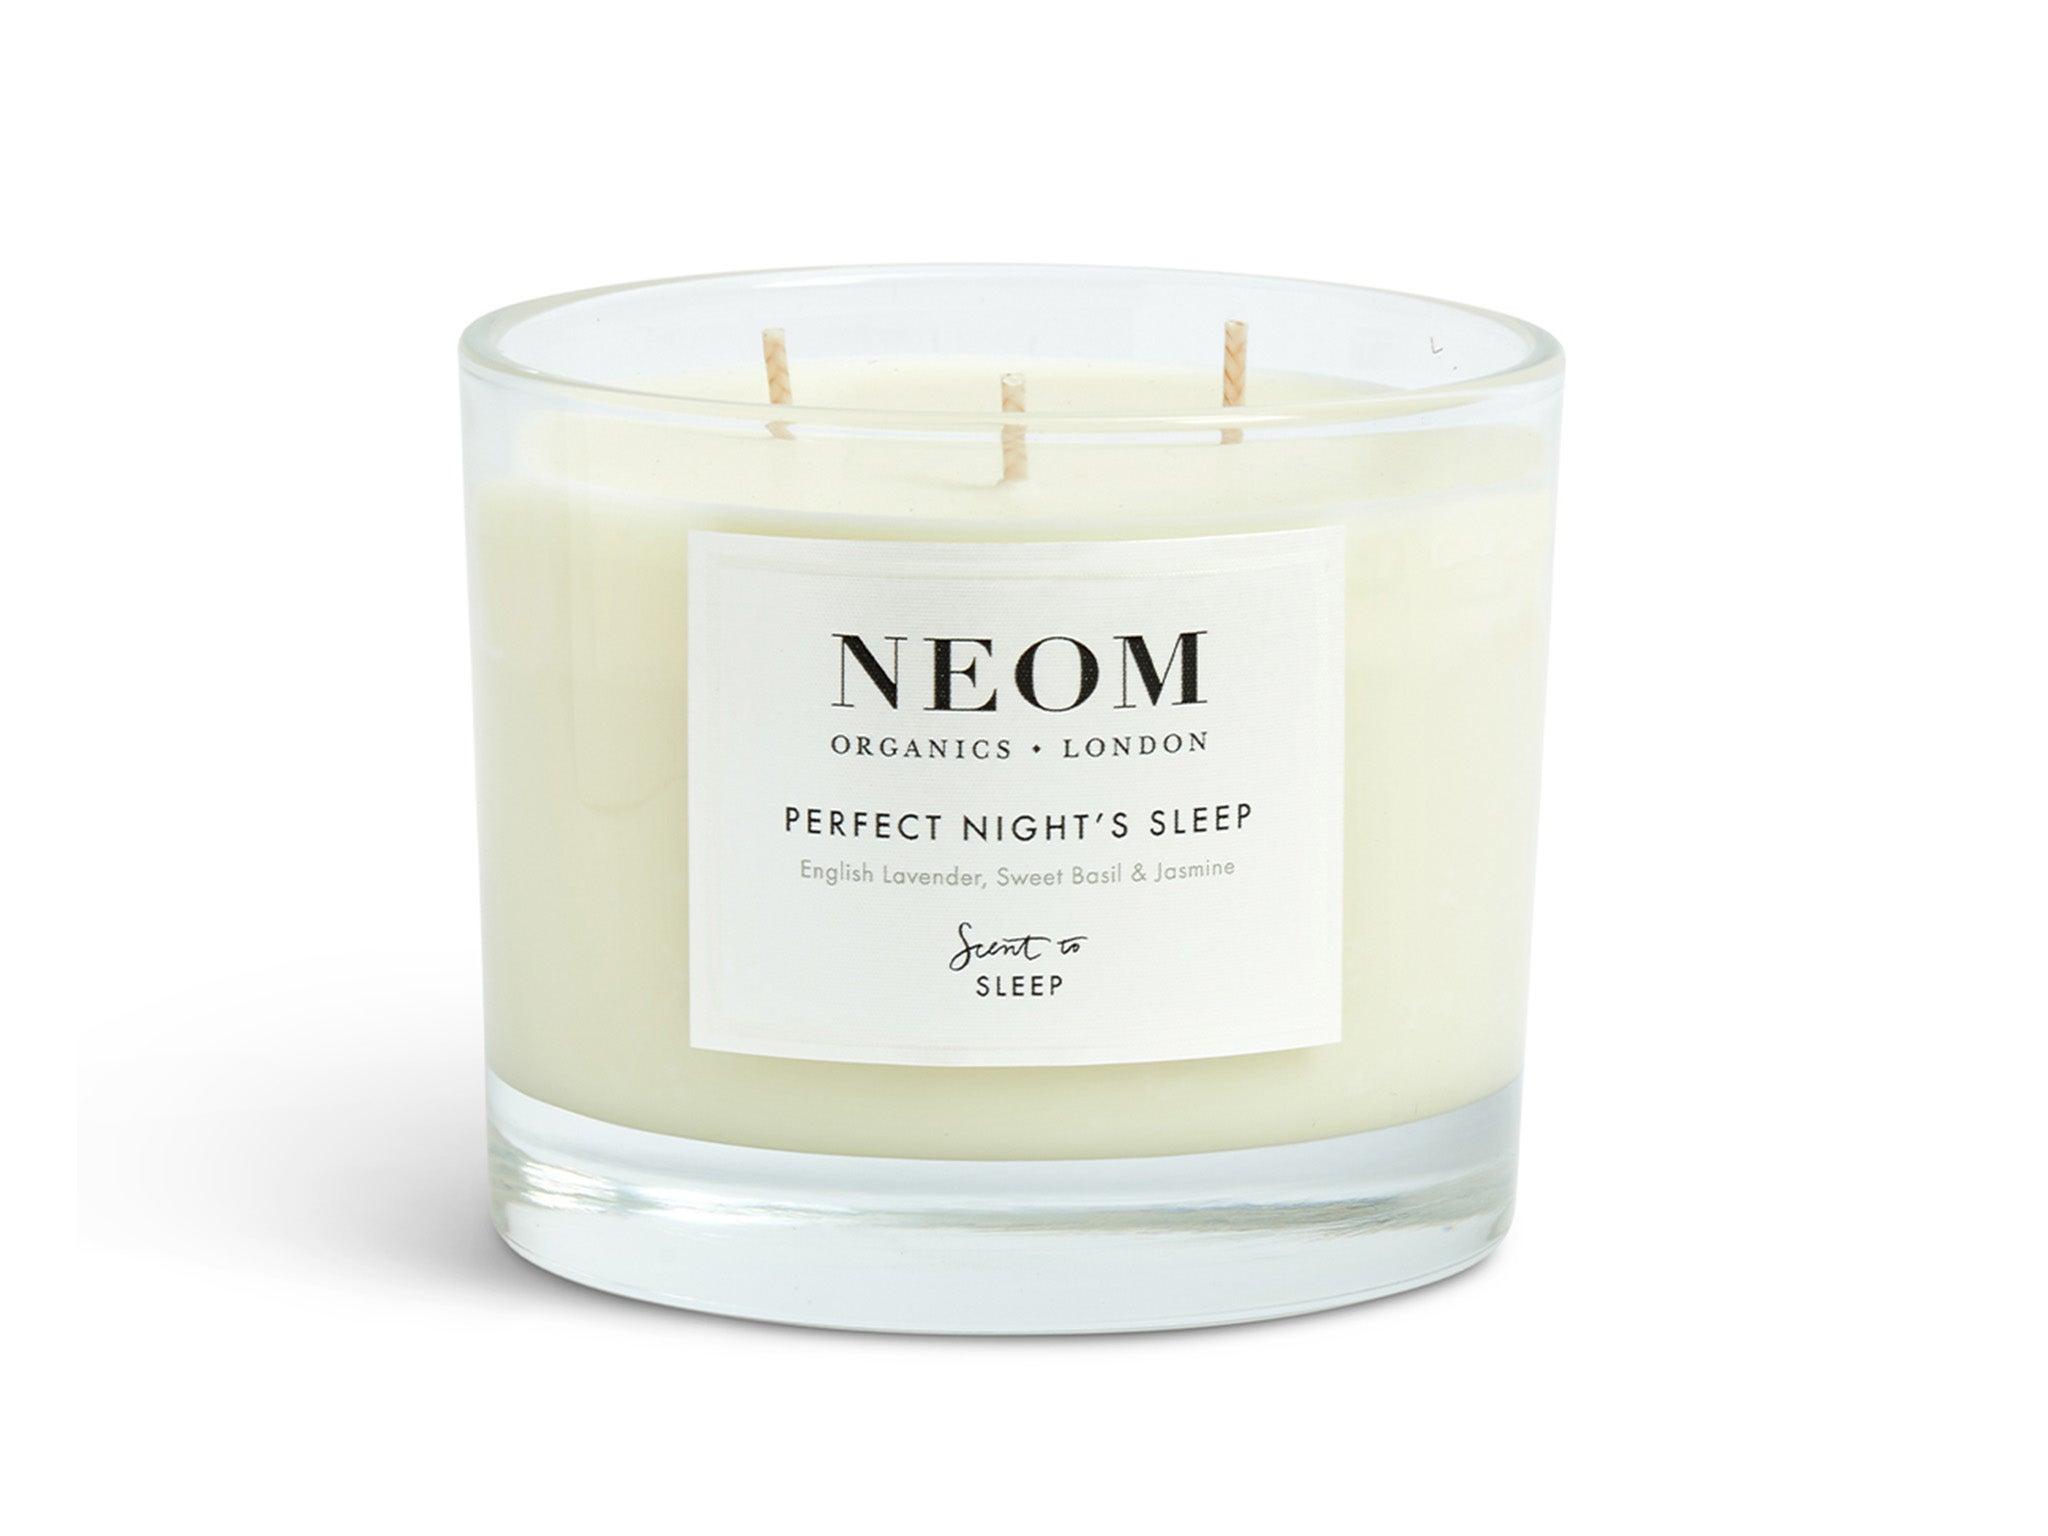 Neom perfect night’s sleep scented candle, 3 wick indybest.jpg